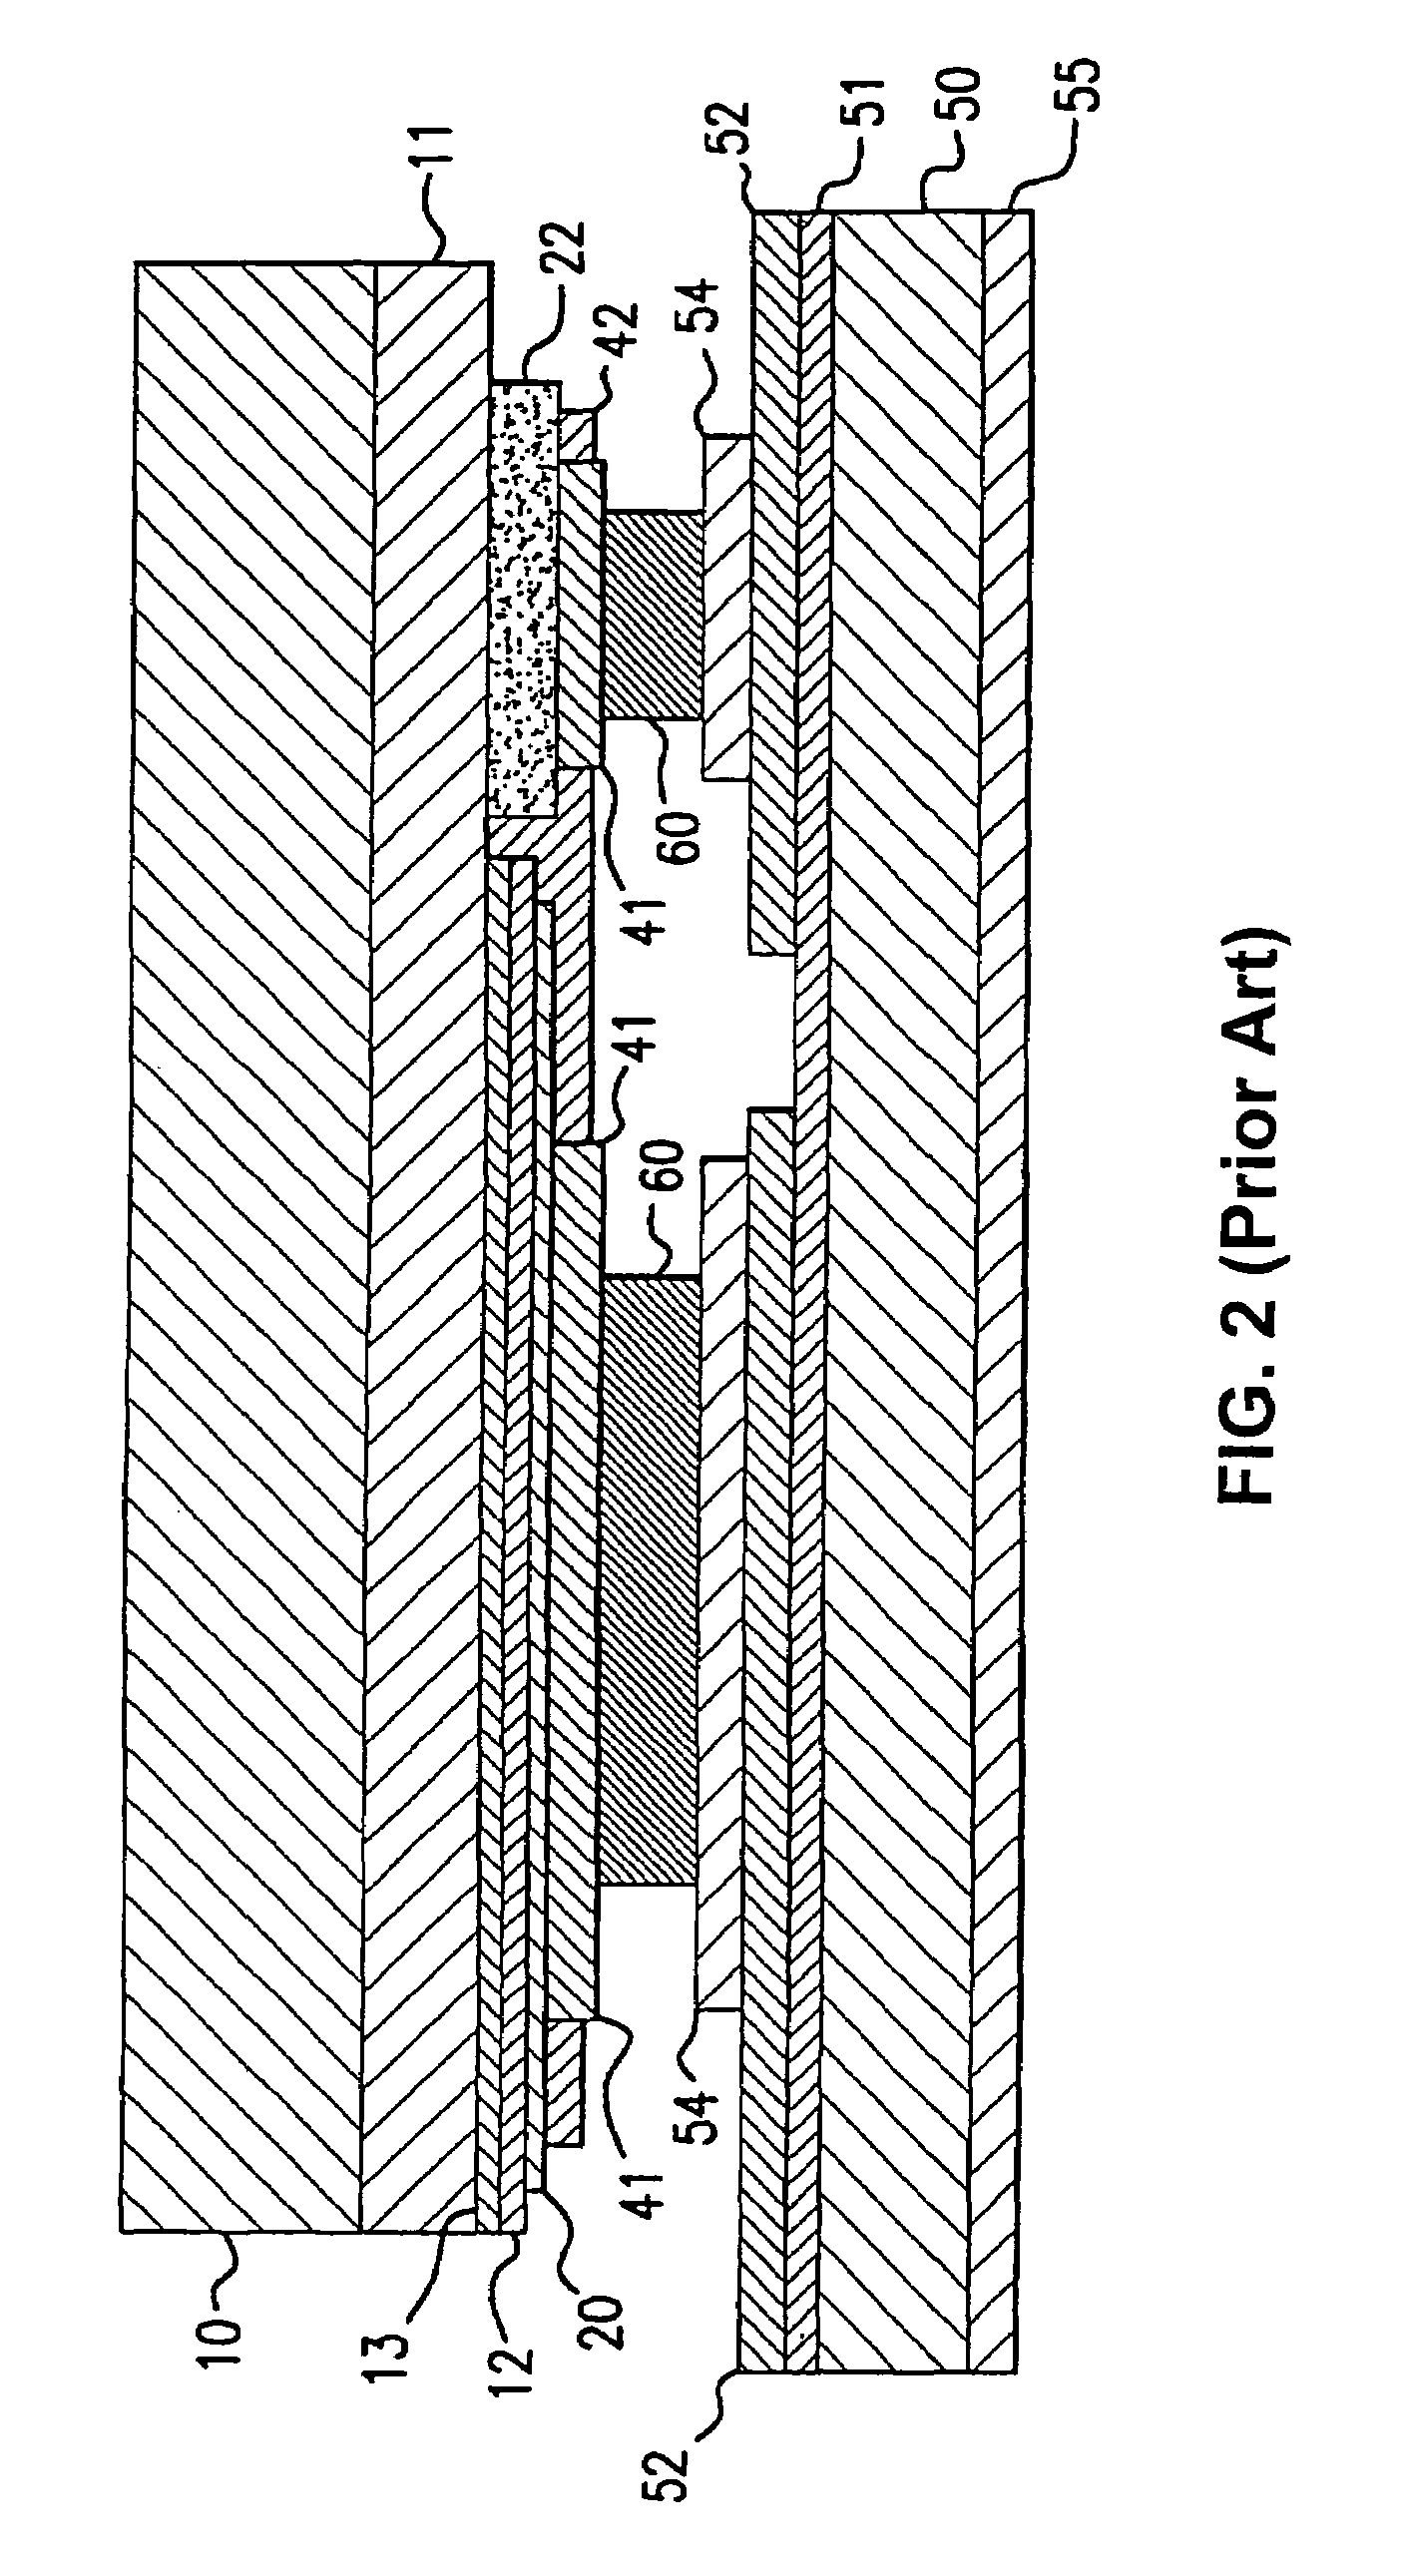 Interconnects for semiconductor light emitting devices